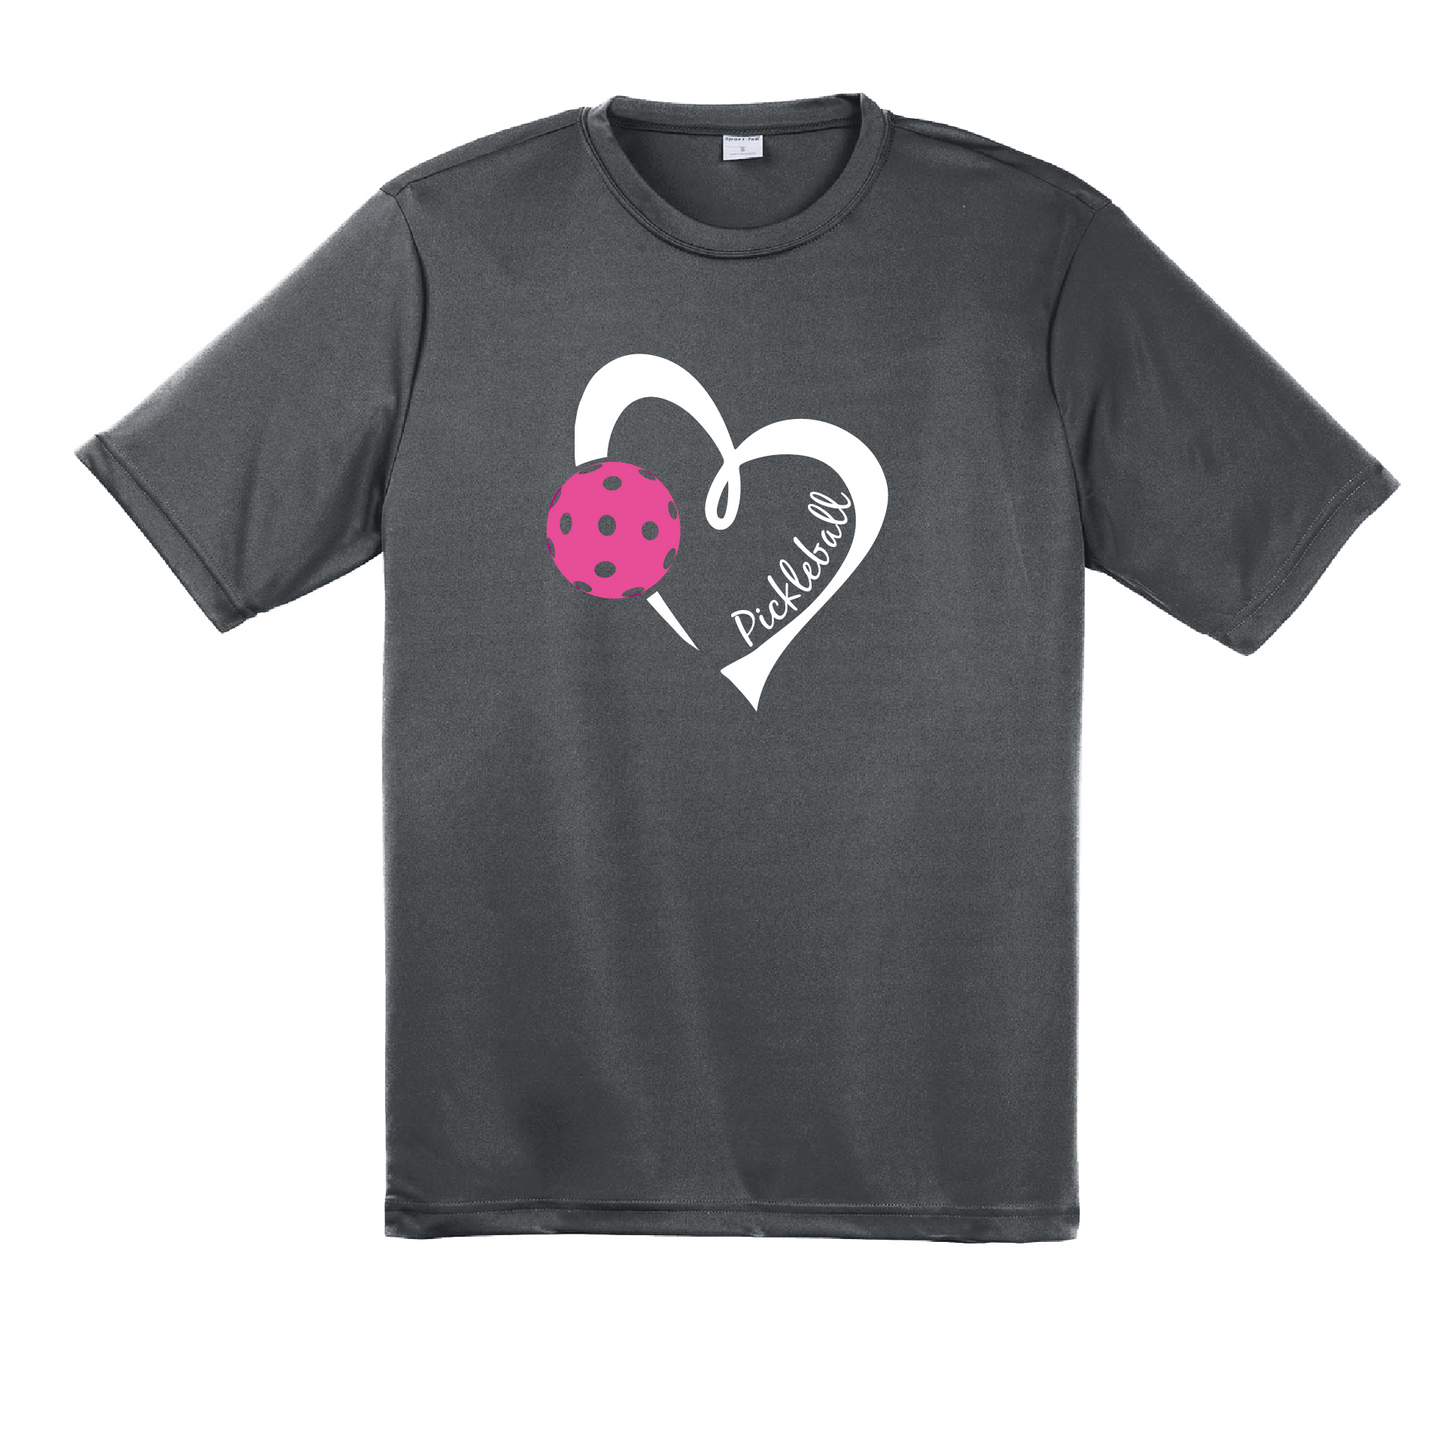 Pickleball Design: Heart with Pickleball  Men's Style: Short Sleeve  Shirts are lightweight, roomy and highly breathable. These moisture-wicking shirts are designed for athletic performance. They feature PosiCharge technology to lock in color and prevent logos from fading. Removable tag and set-in sleeves for comfort.